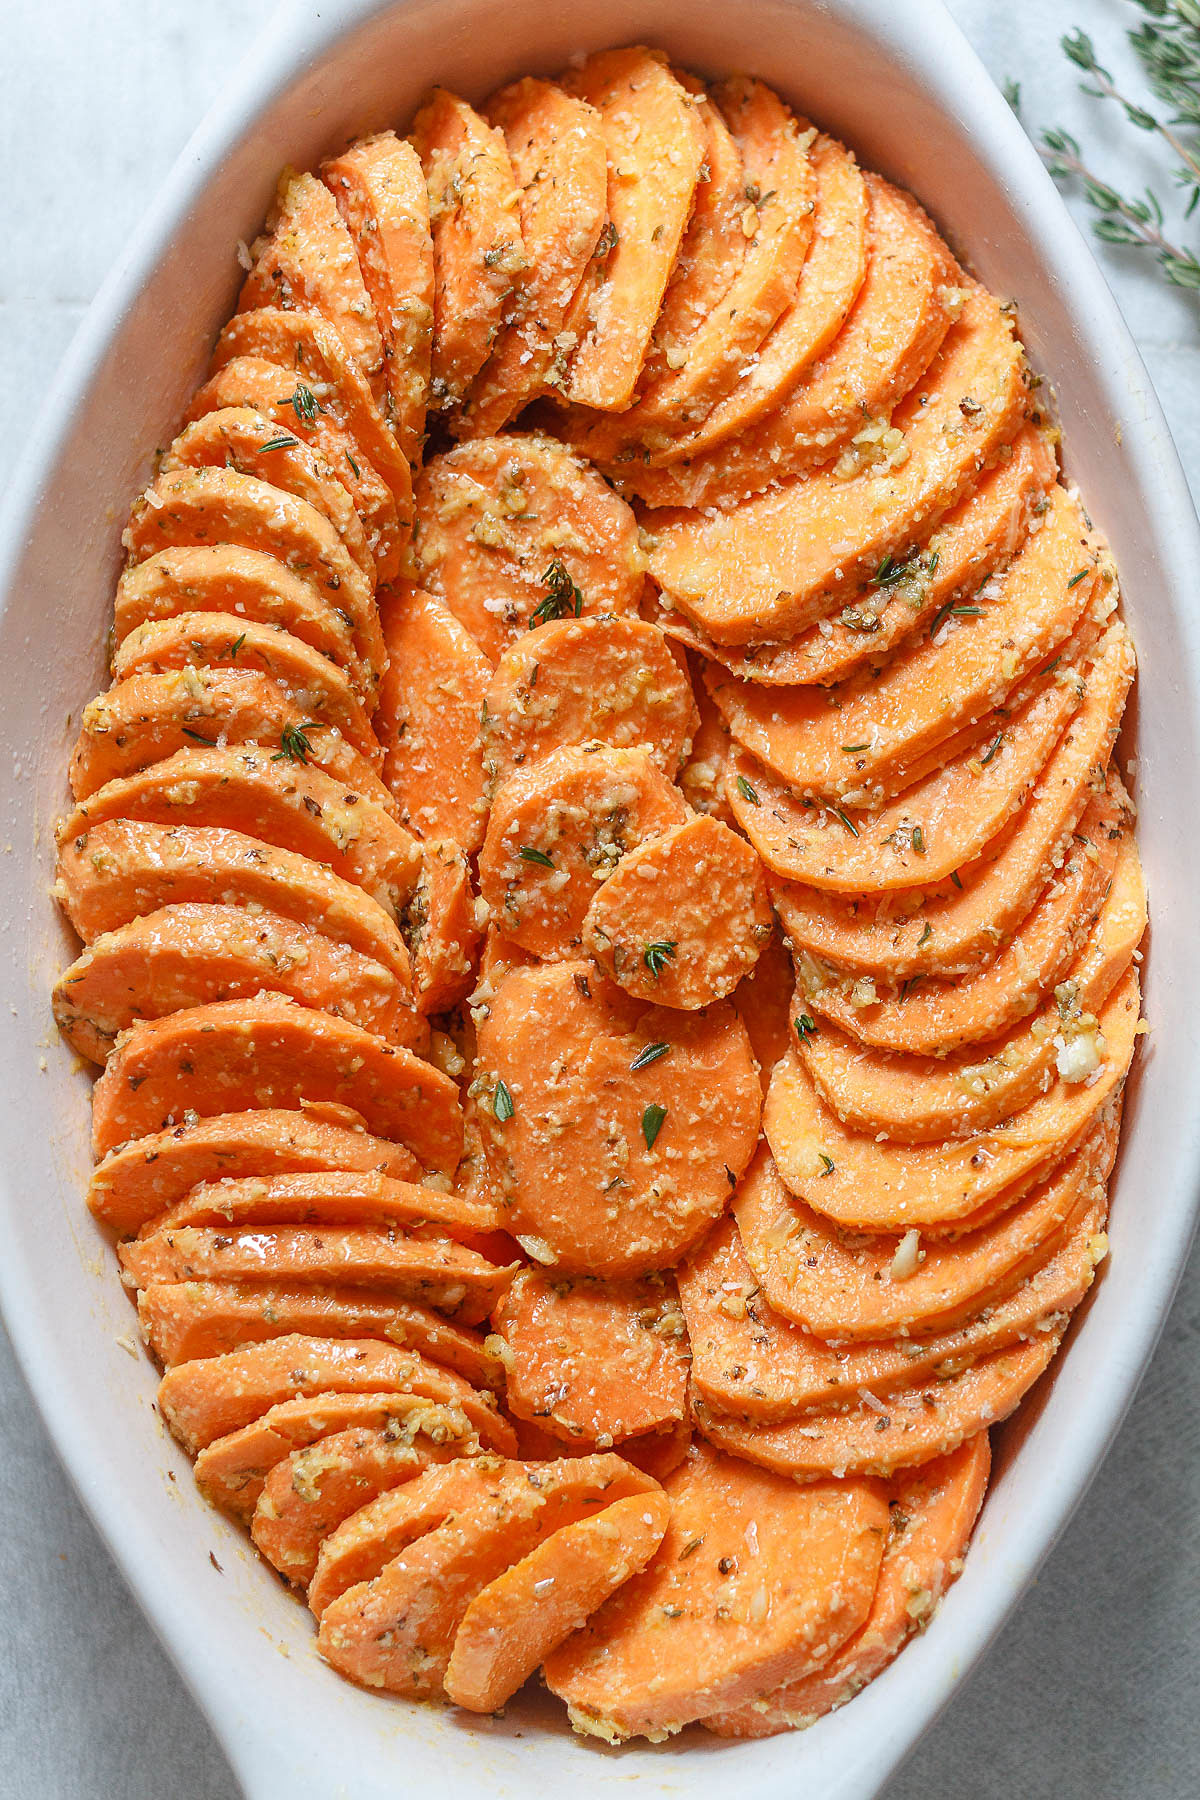 Garlic Parmesan Roasted Sweet Potatoes - #eatwell101 #recipe Tender, extra-flavorful #Roasted Sweet #Potatoes easy to make.  - #recipe by #eatwell101